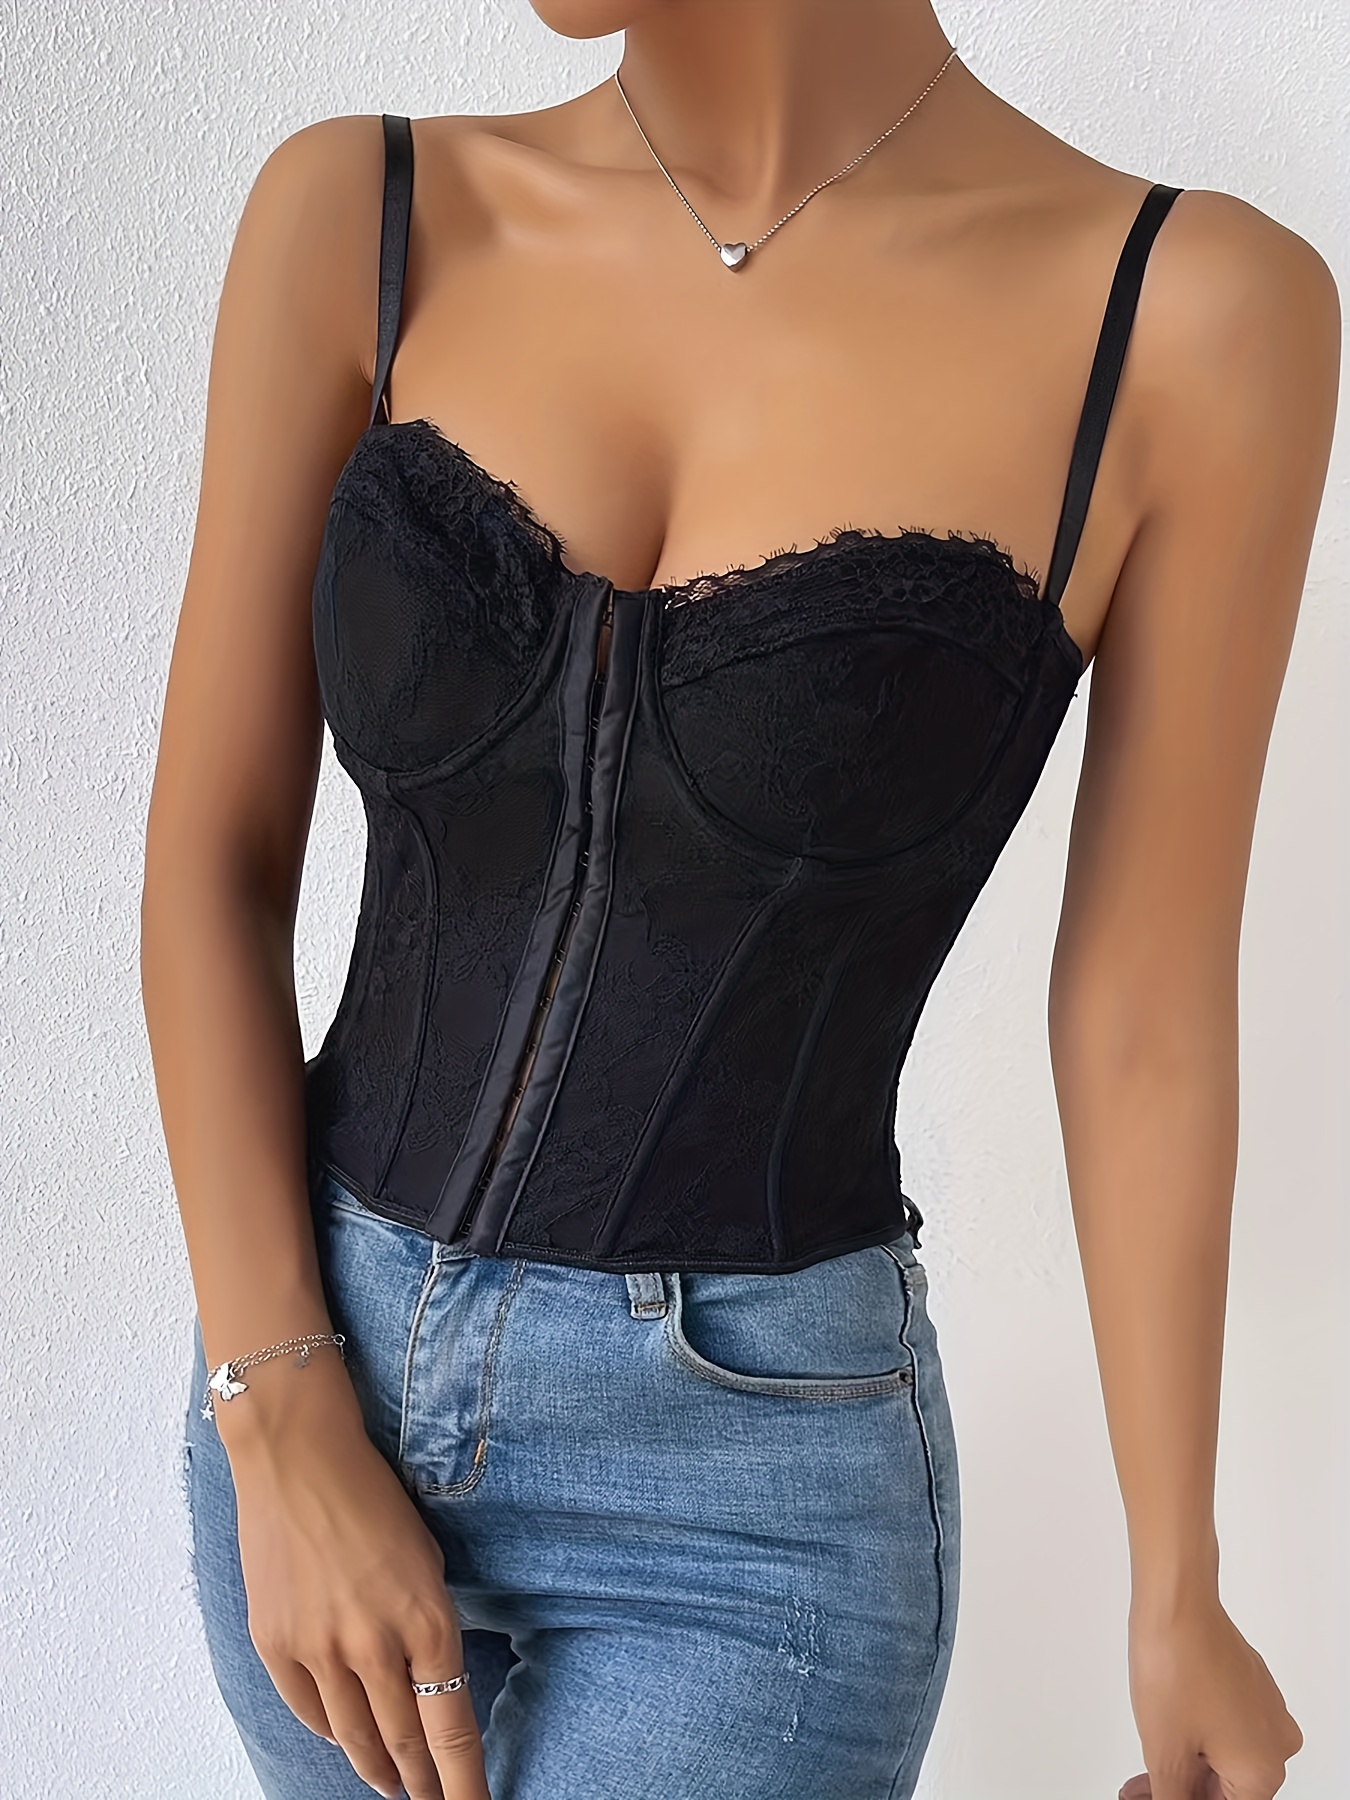 Black Corset Slimming Camisole Body Shaper Top For Tightening